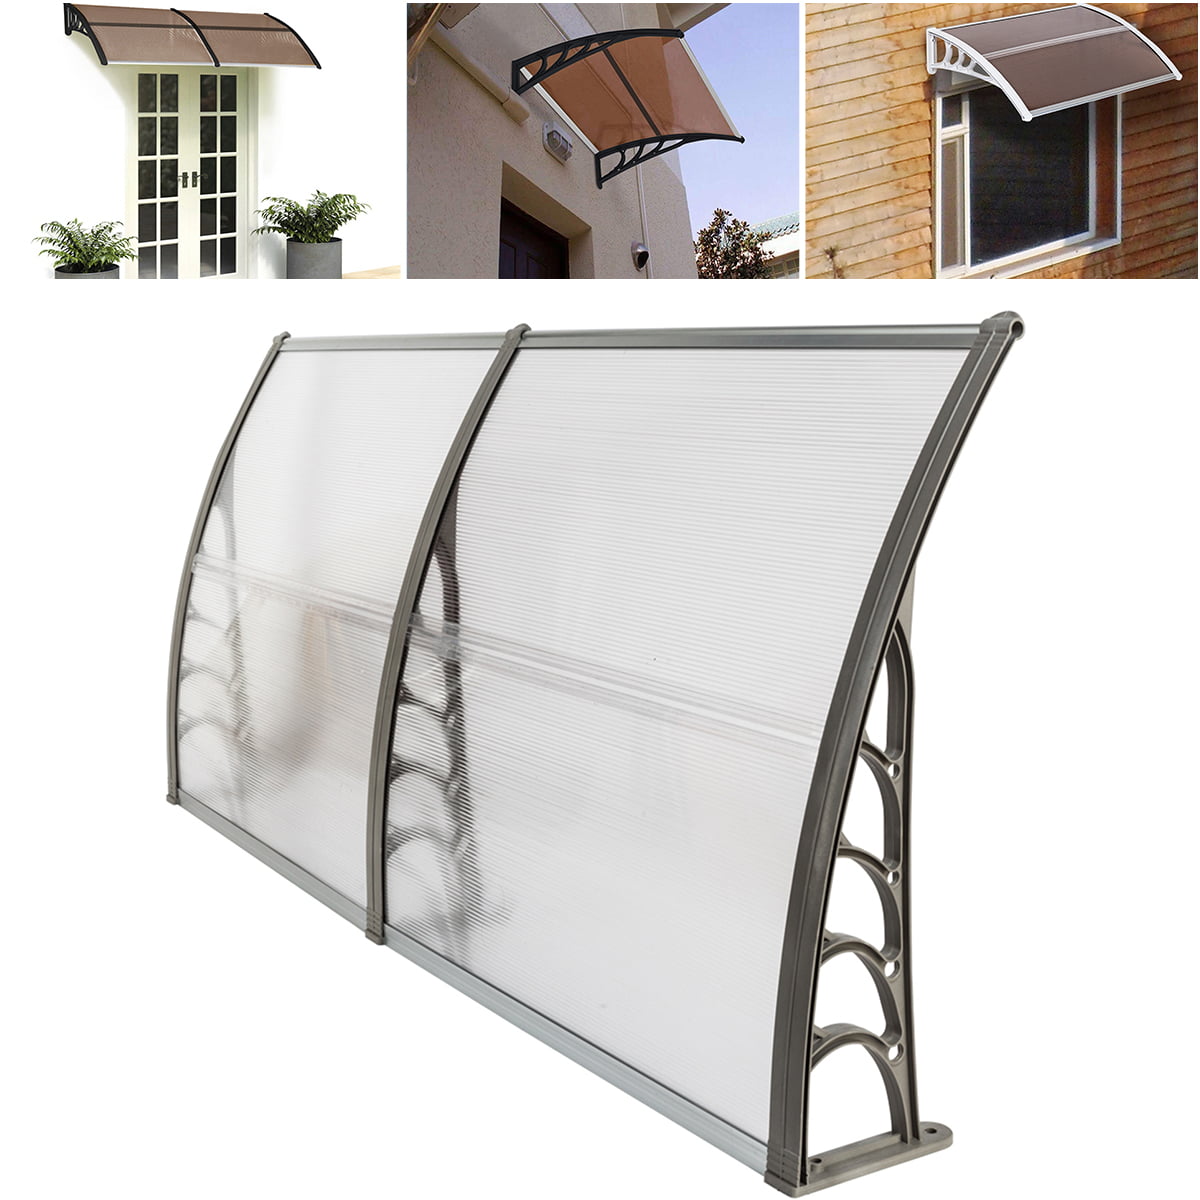 Modern Polycarbonate Front Door Canopy Patio Window Hollow Sheet for Doors and Windows Window Door Cover for Rain Snow Sunlight Protection Black bracket/White board 40x30 Window Awning